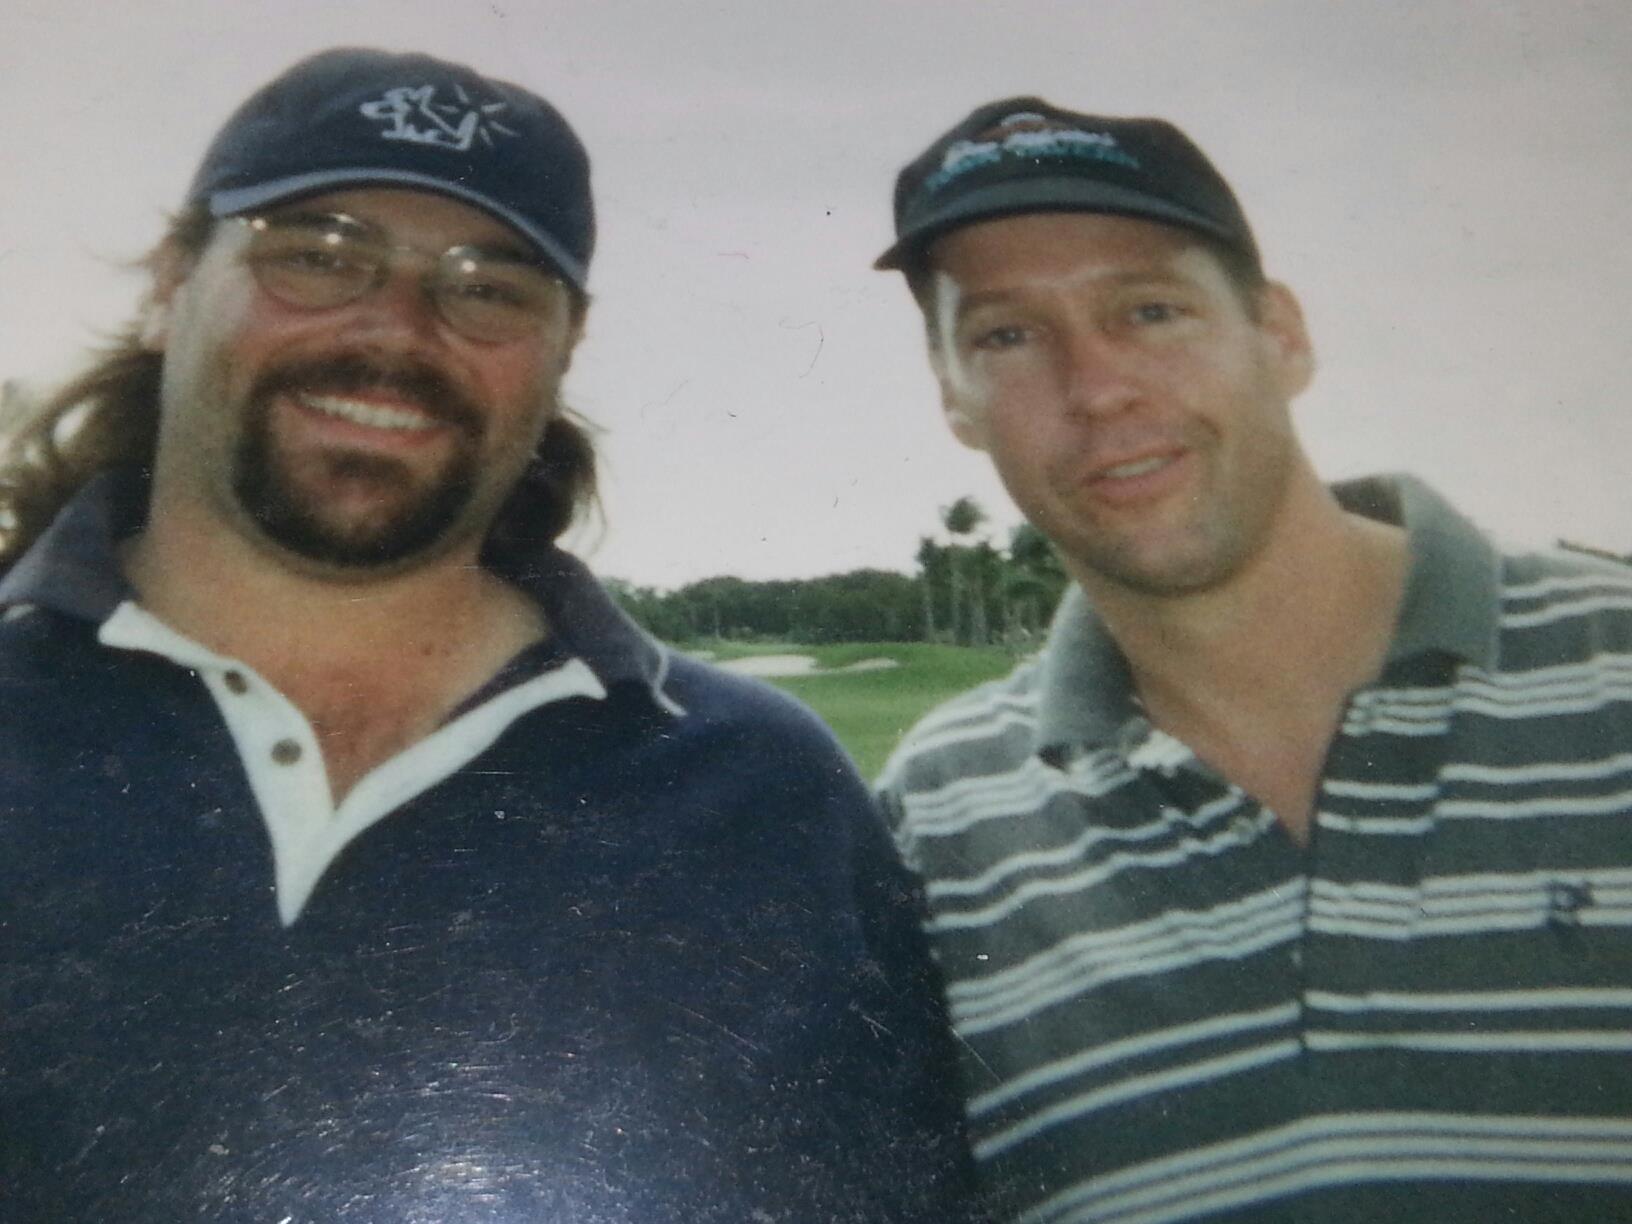 Me and DB Sweeney at Dan Marino's golf outing in FT Lauderdale.